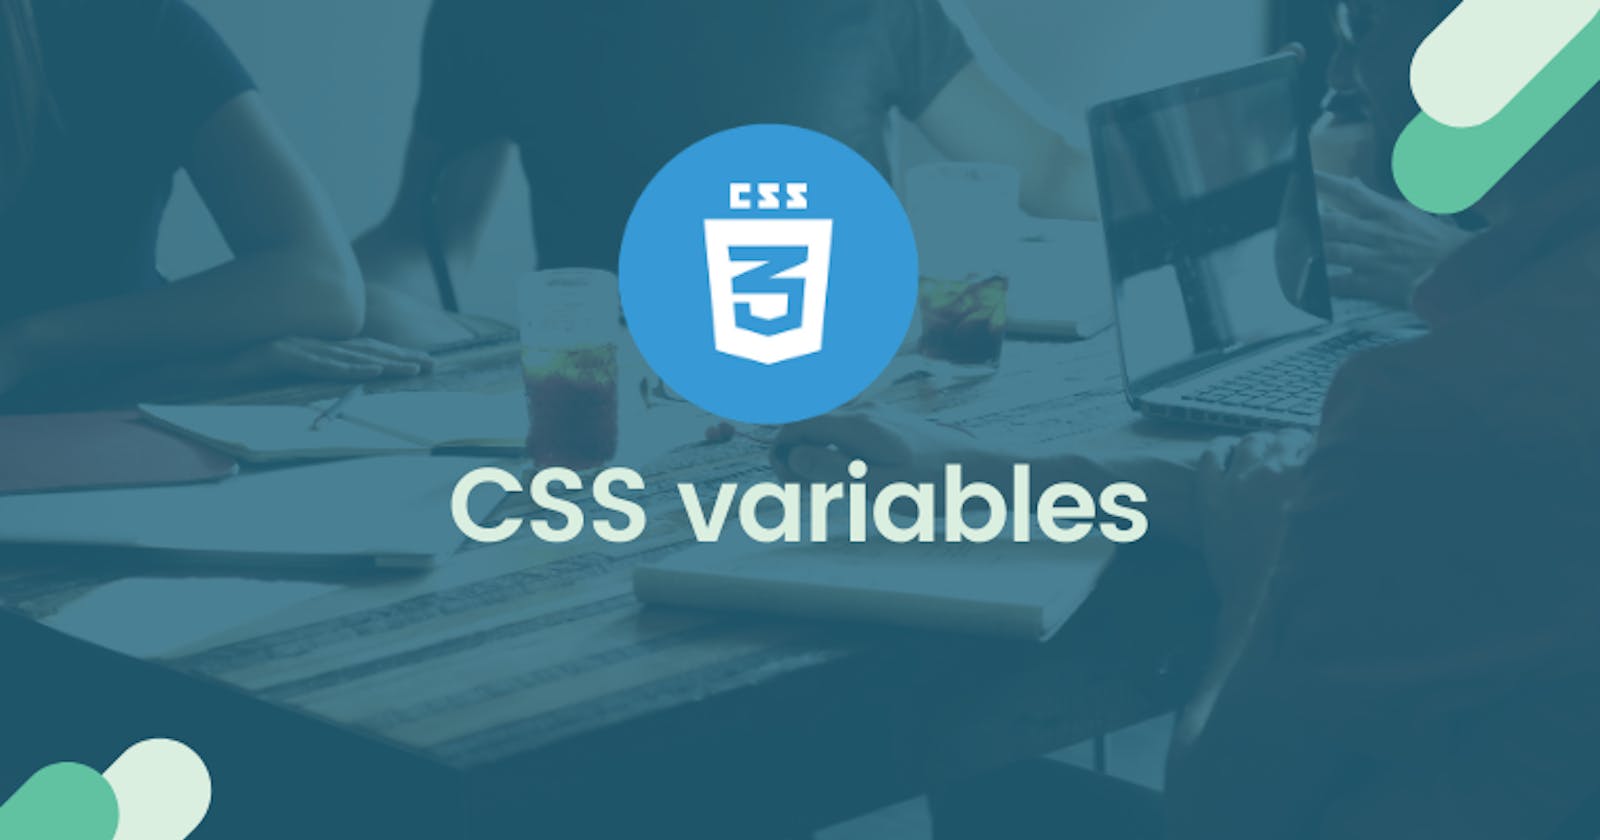 Dark/light website theming with CSS variables